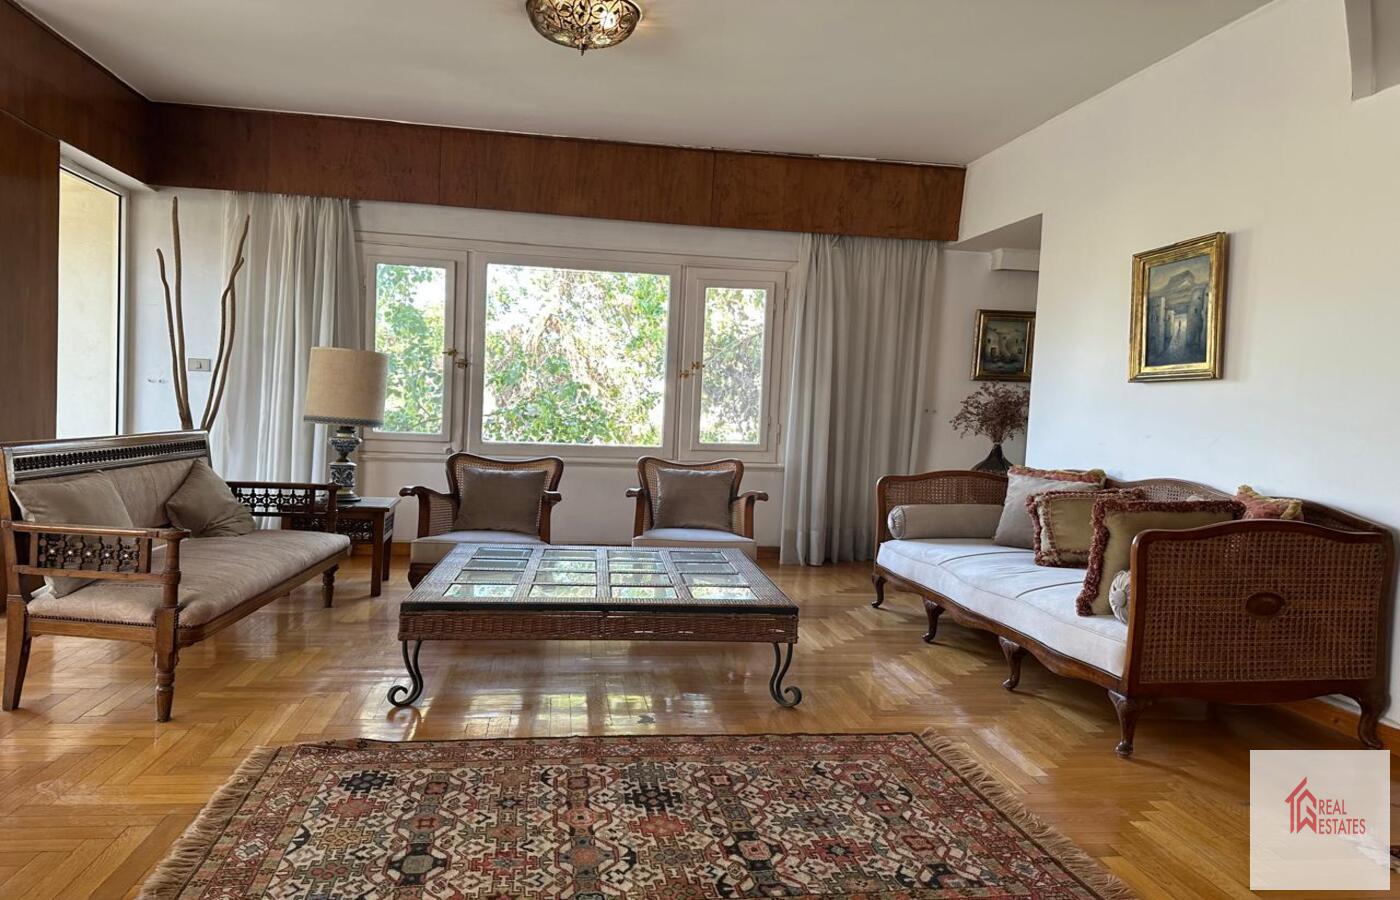 Lovely Fully Furnished Apartment For Rent In a Prime Location In Maadi Sarayat.